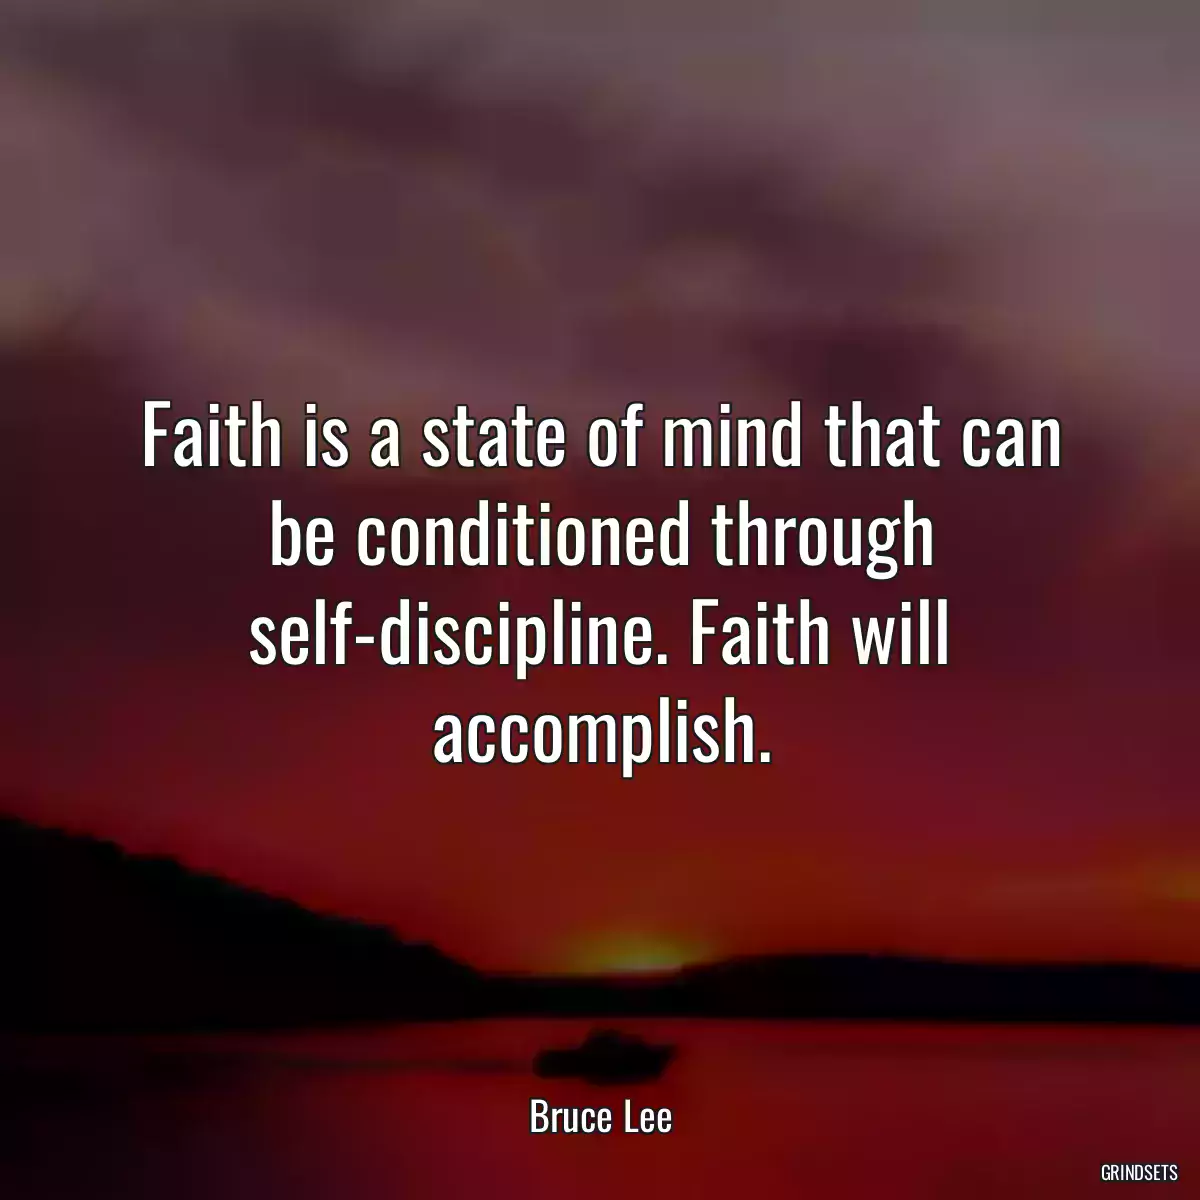 Faith is a state of mind that can be conditioned through self-discipline. Faith will accomplish.